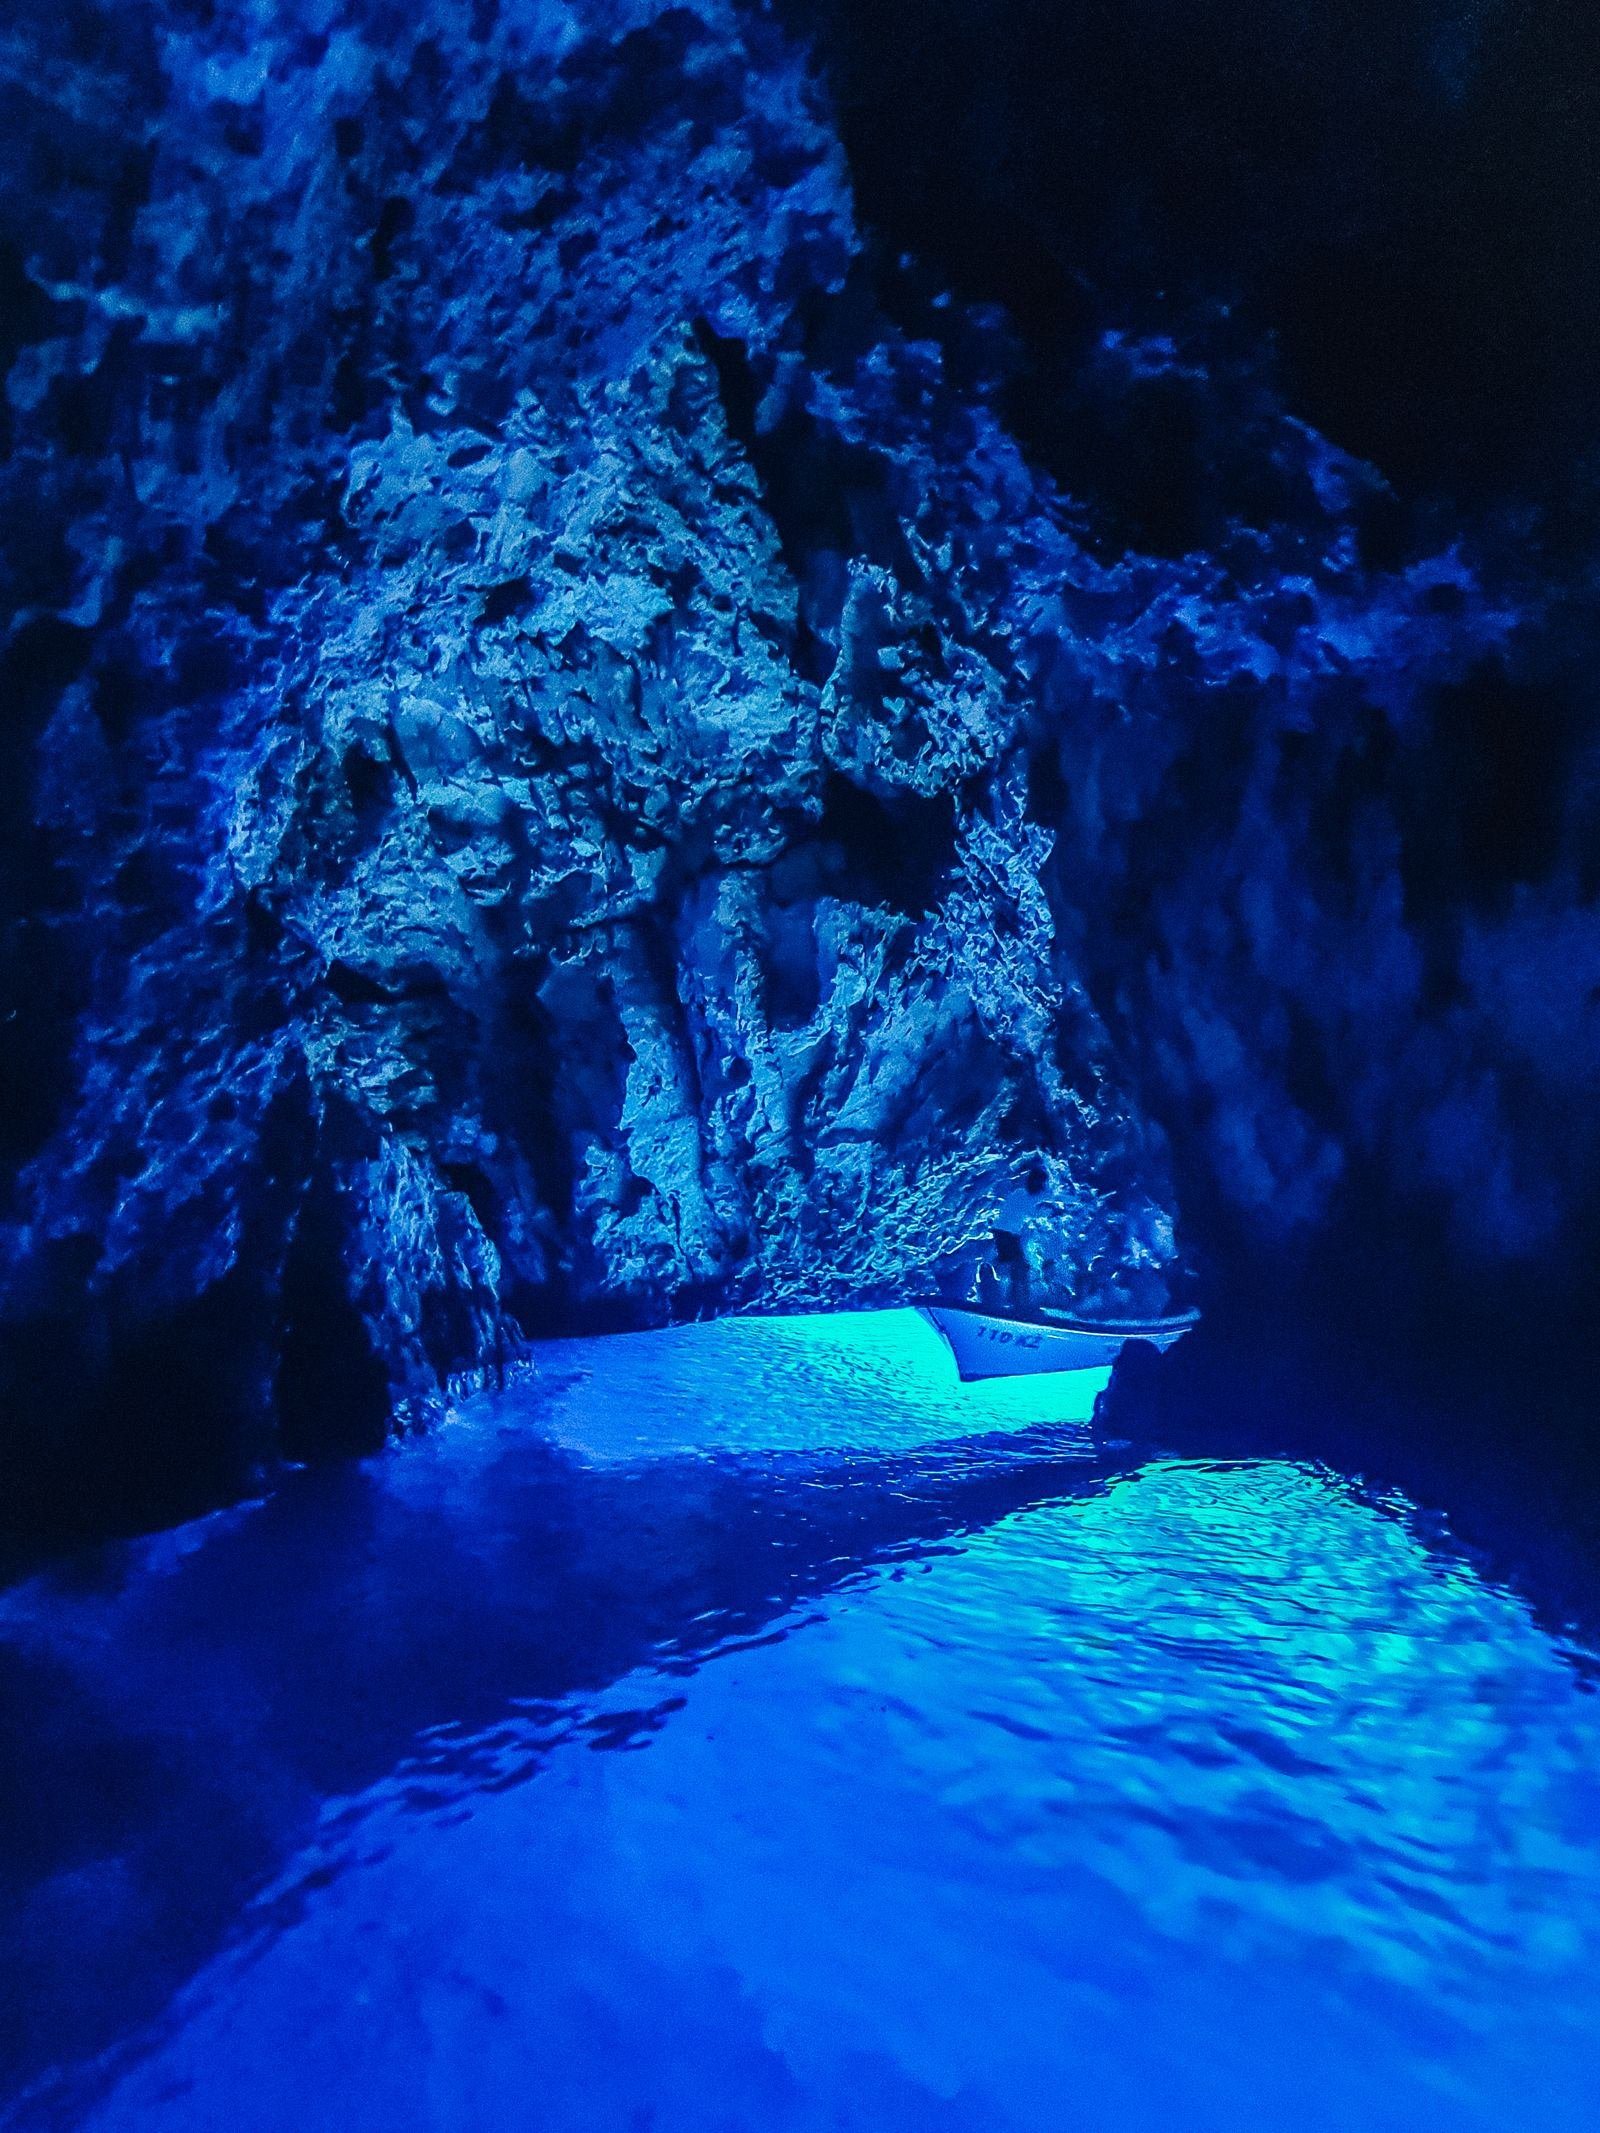 Inside a dark cave, the only light is blue light coming up from the water below. A small white boat can be seen further into the cave